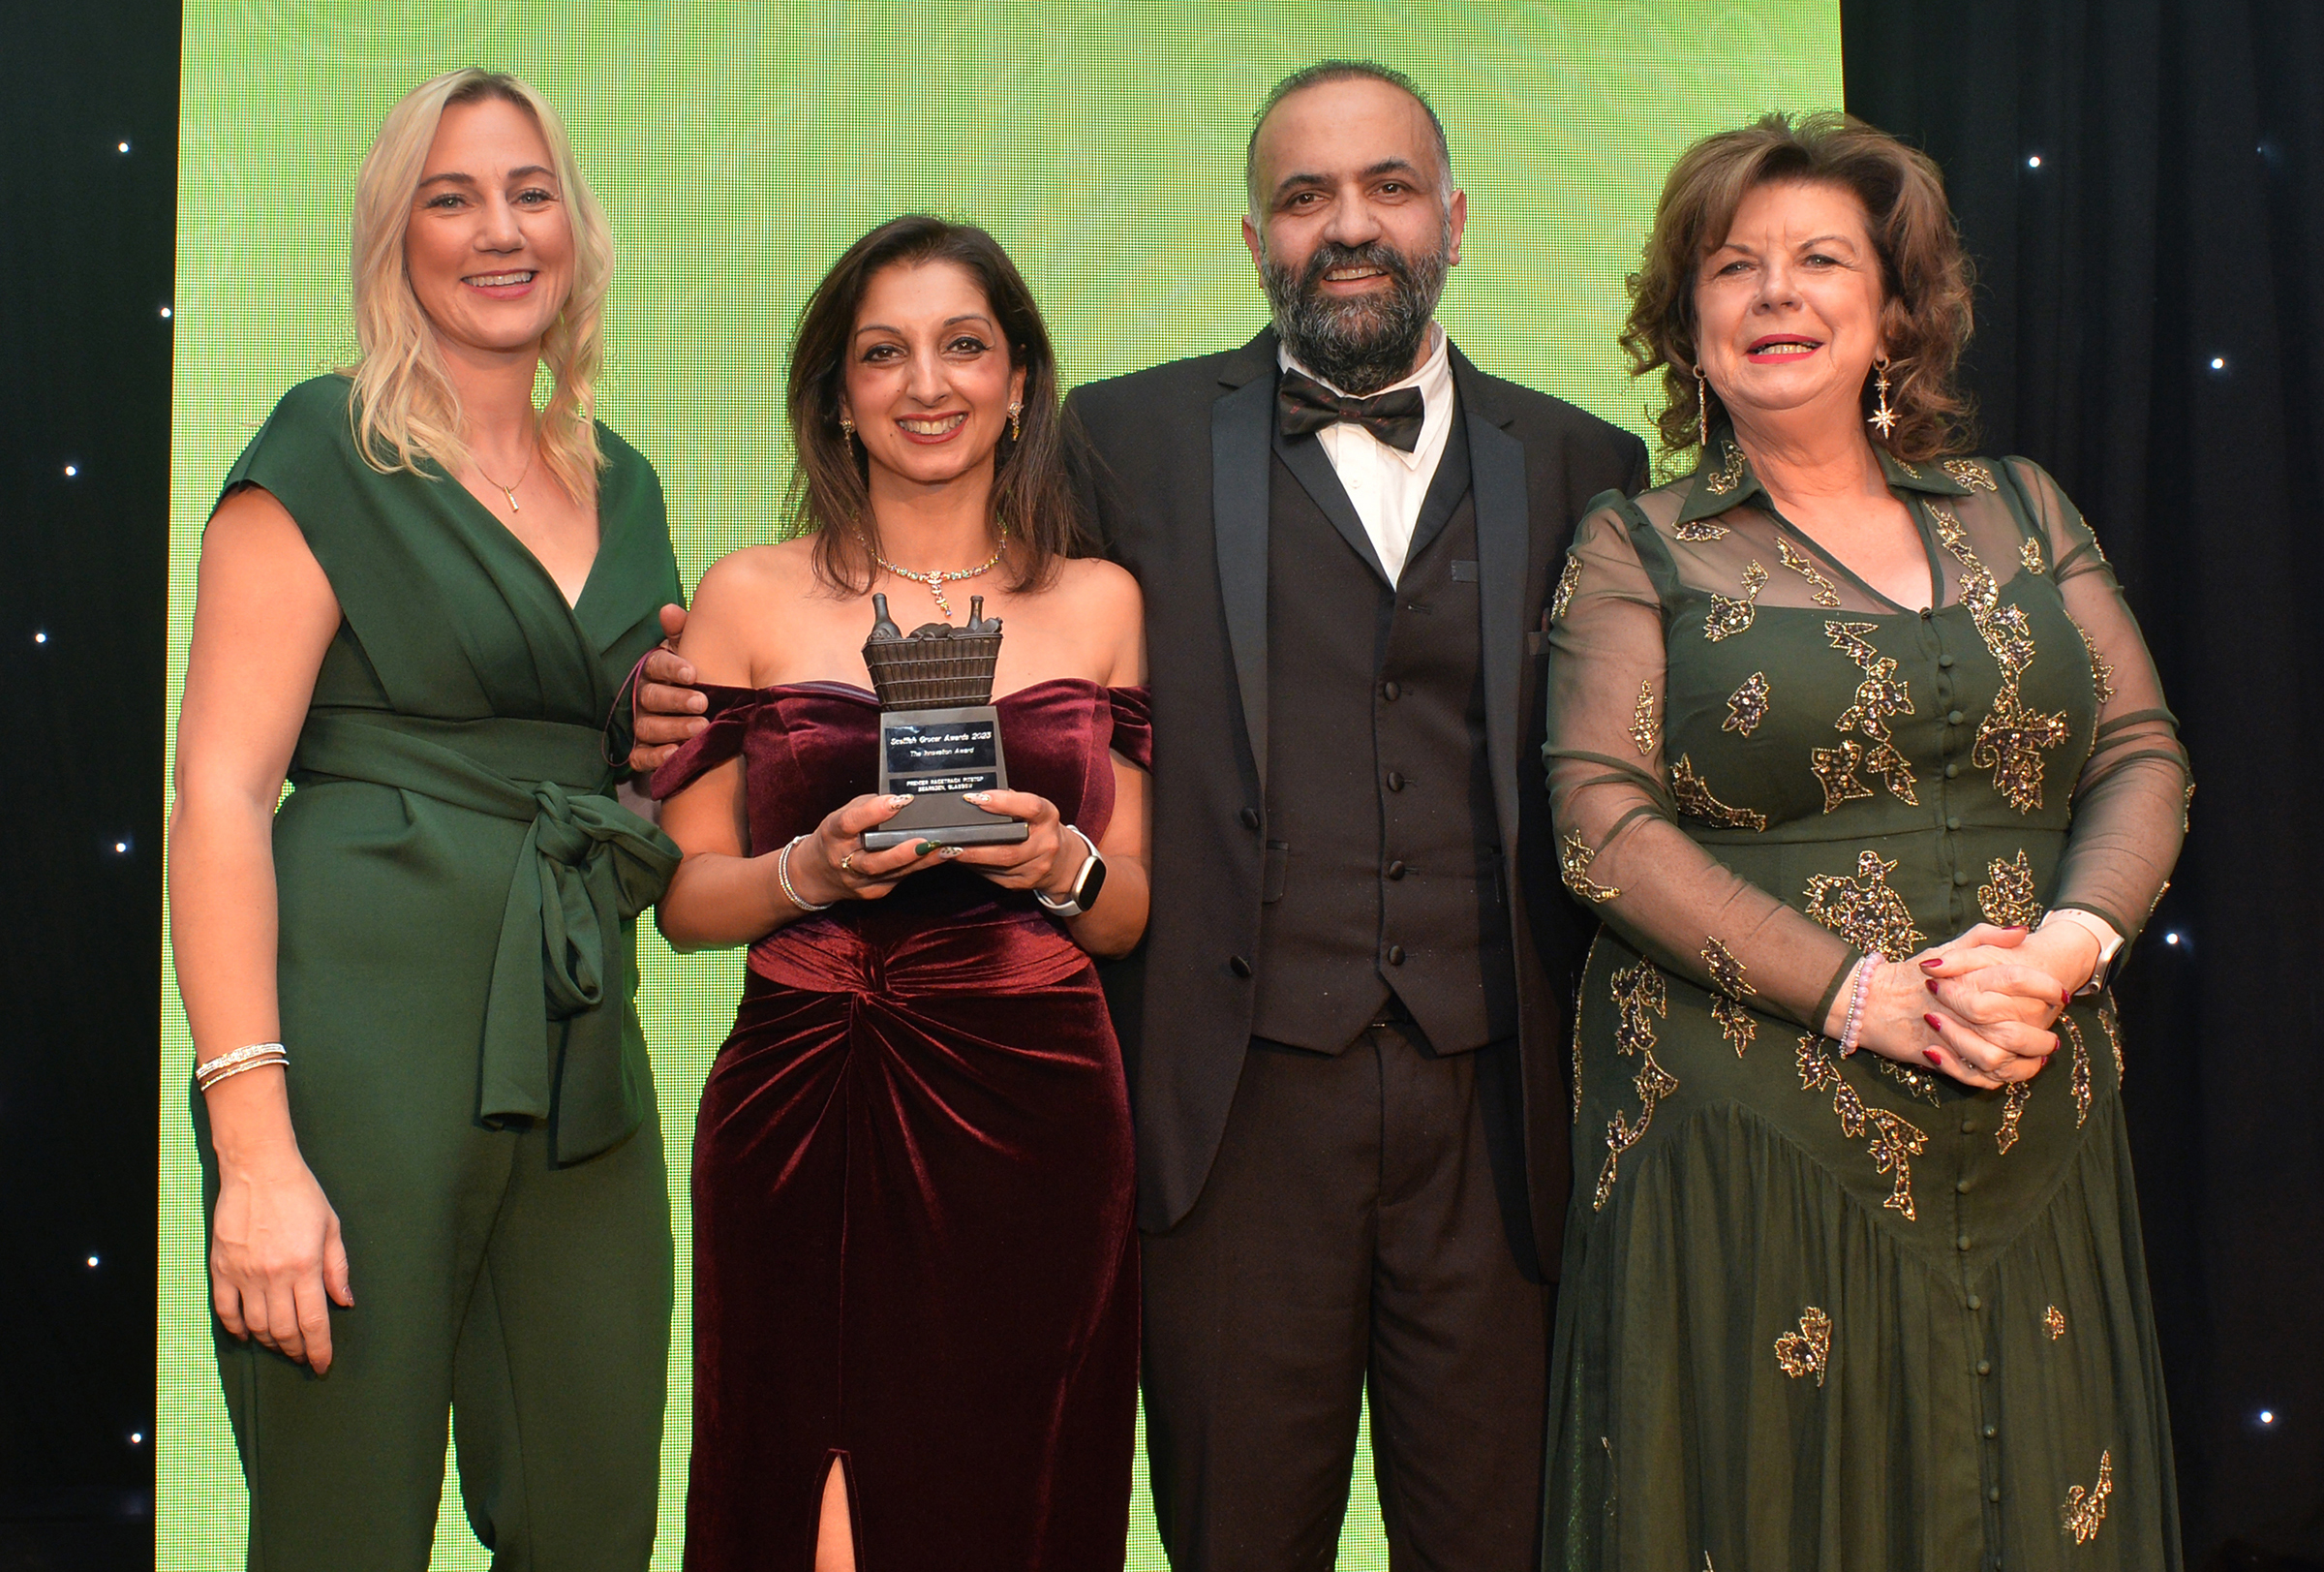 Shamly and Vikas Sud, whose GHSL Ltd business owns Premier RaceTrack Pitstop Bearsden, are congratulated by Laura McDermaid, of Philip Morris, and Scottish Grocer Awards host Elaine C Smith.